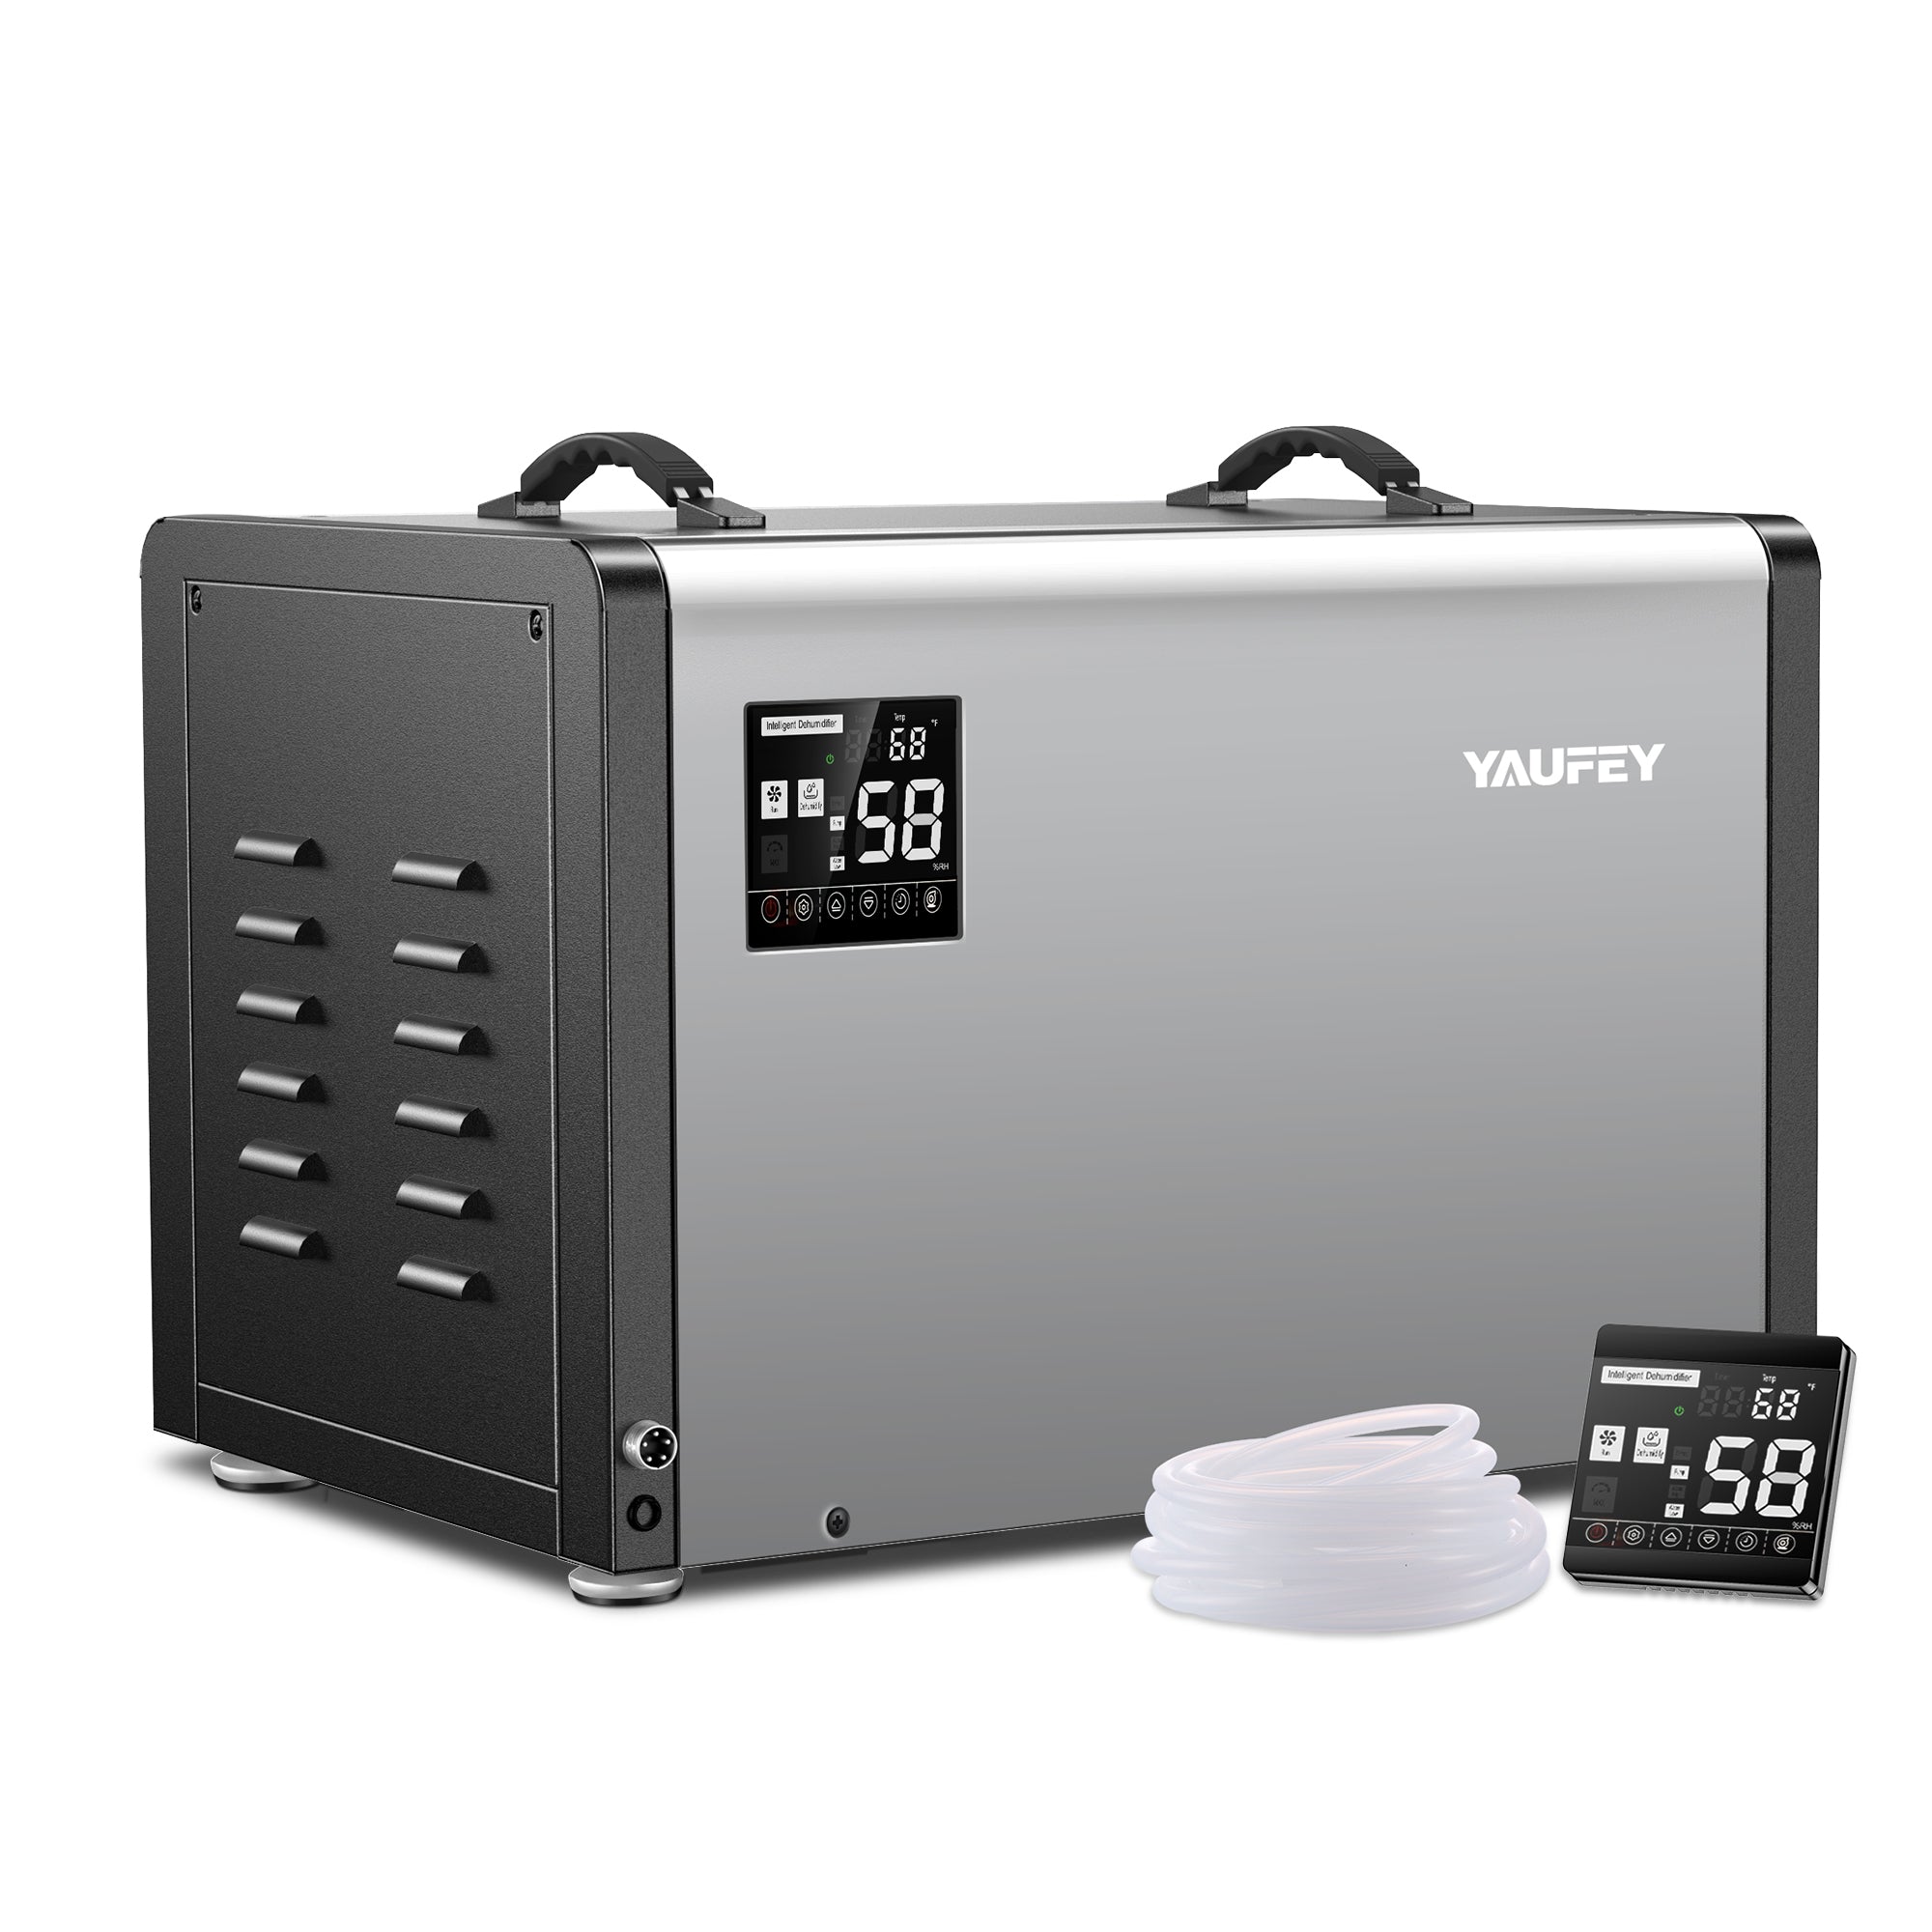 Yaufey 158 Pints Commercial Dehumidifier with Pump and Drain Hose for Crawlspace, Basements, Industrial Spaces